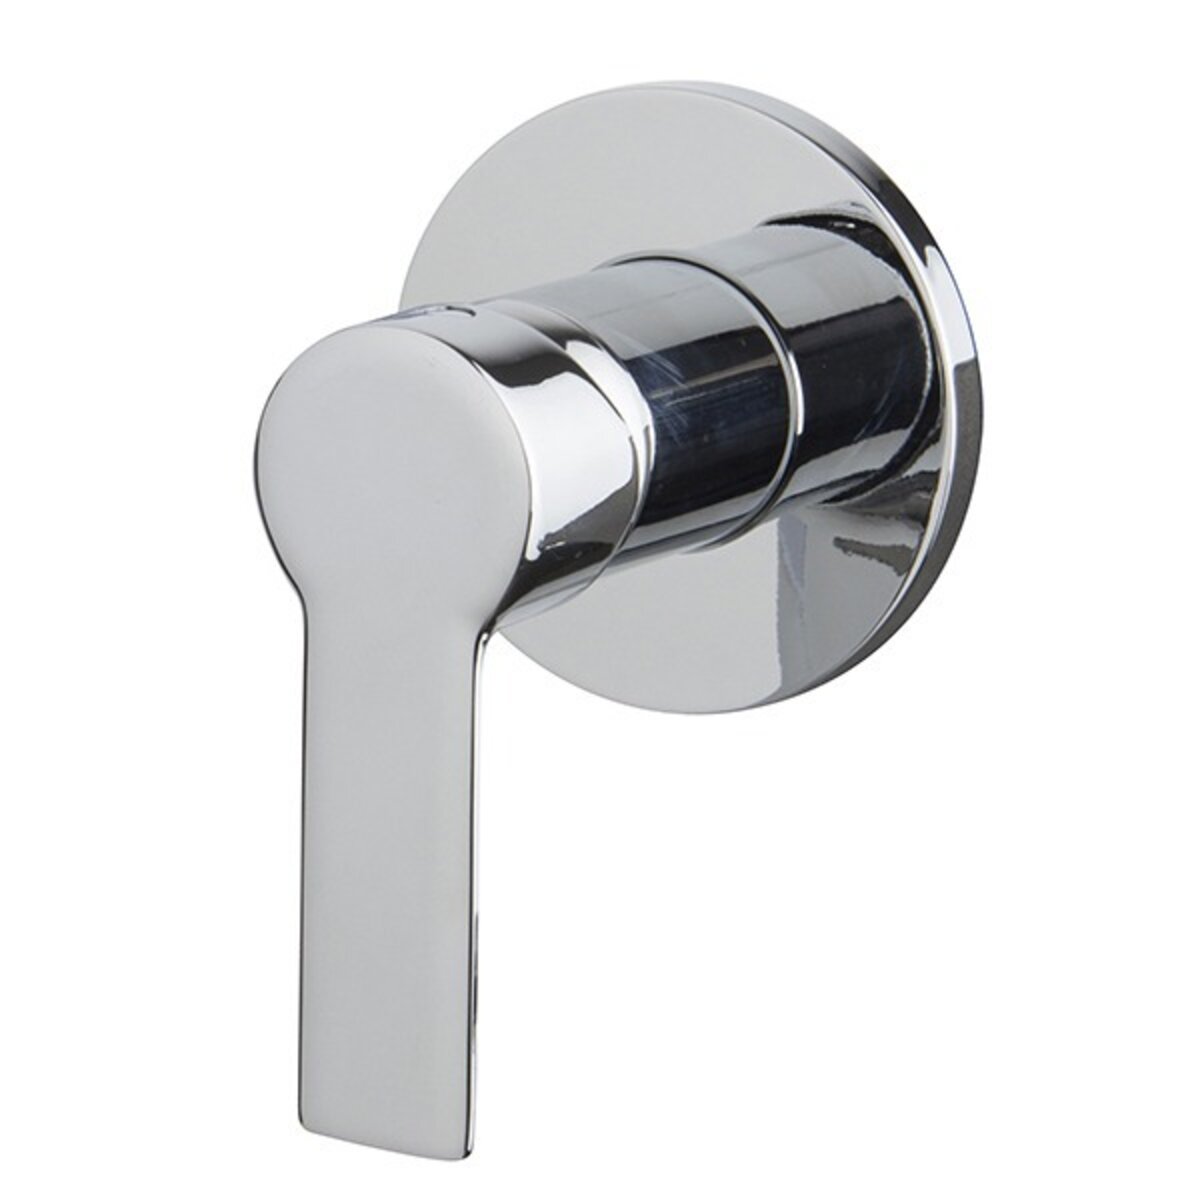 Fima Carlo Frattini Mast built-in shower mixer without diverter